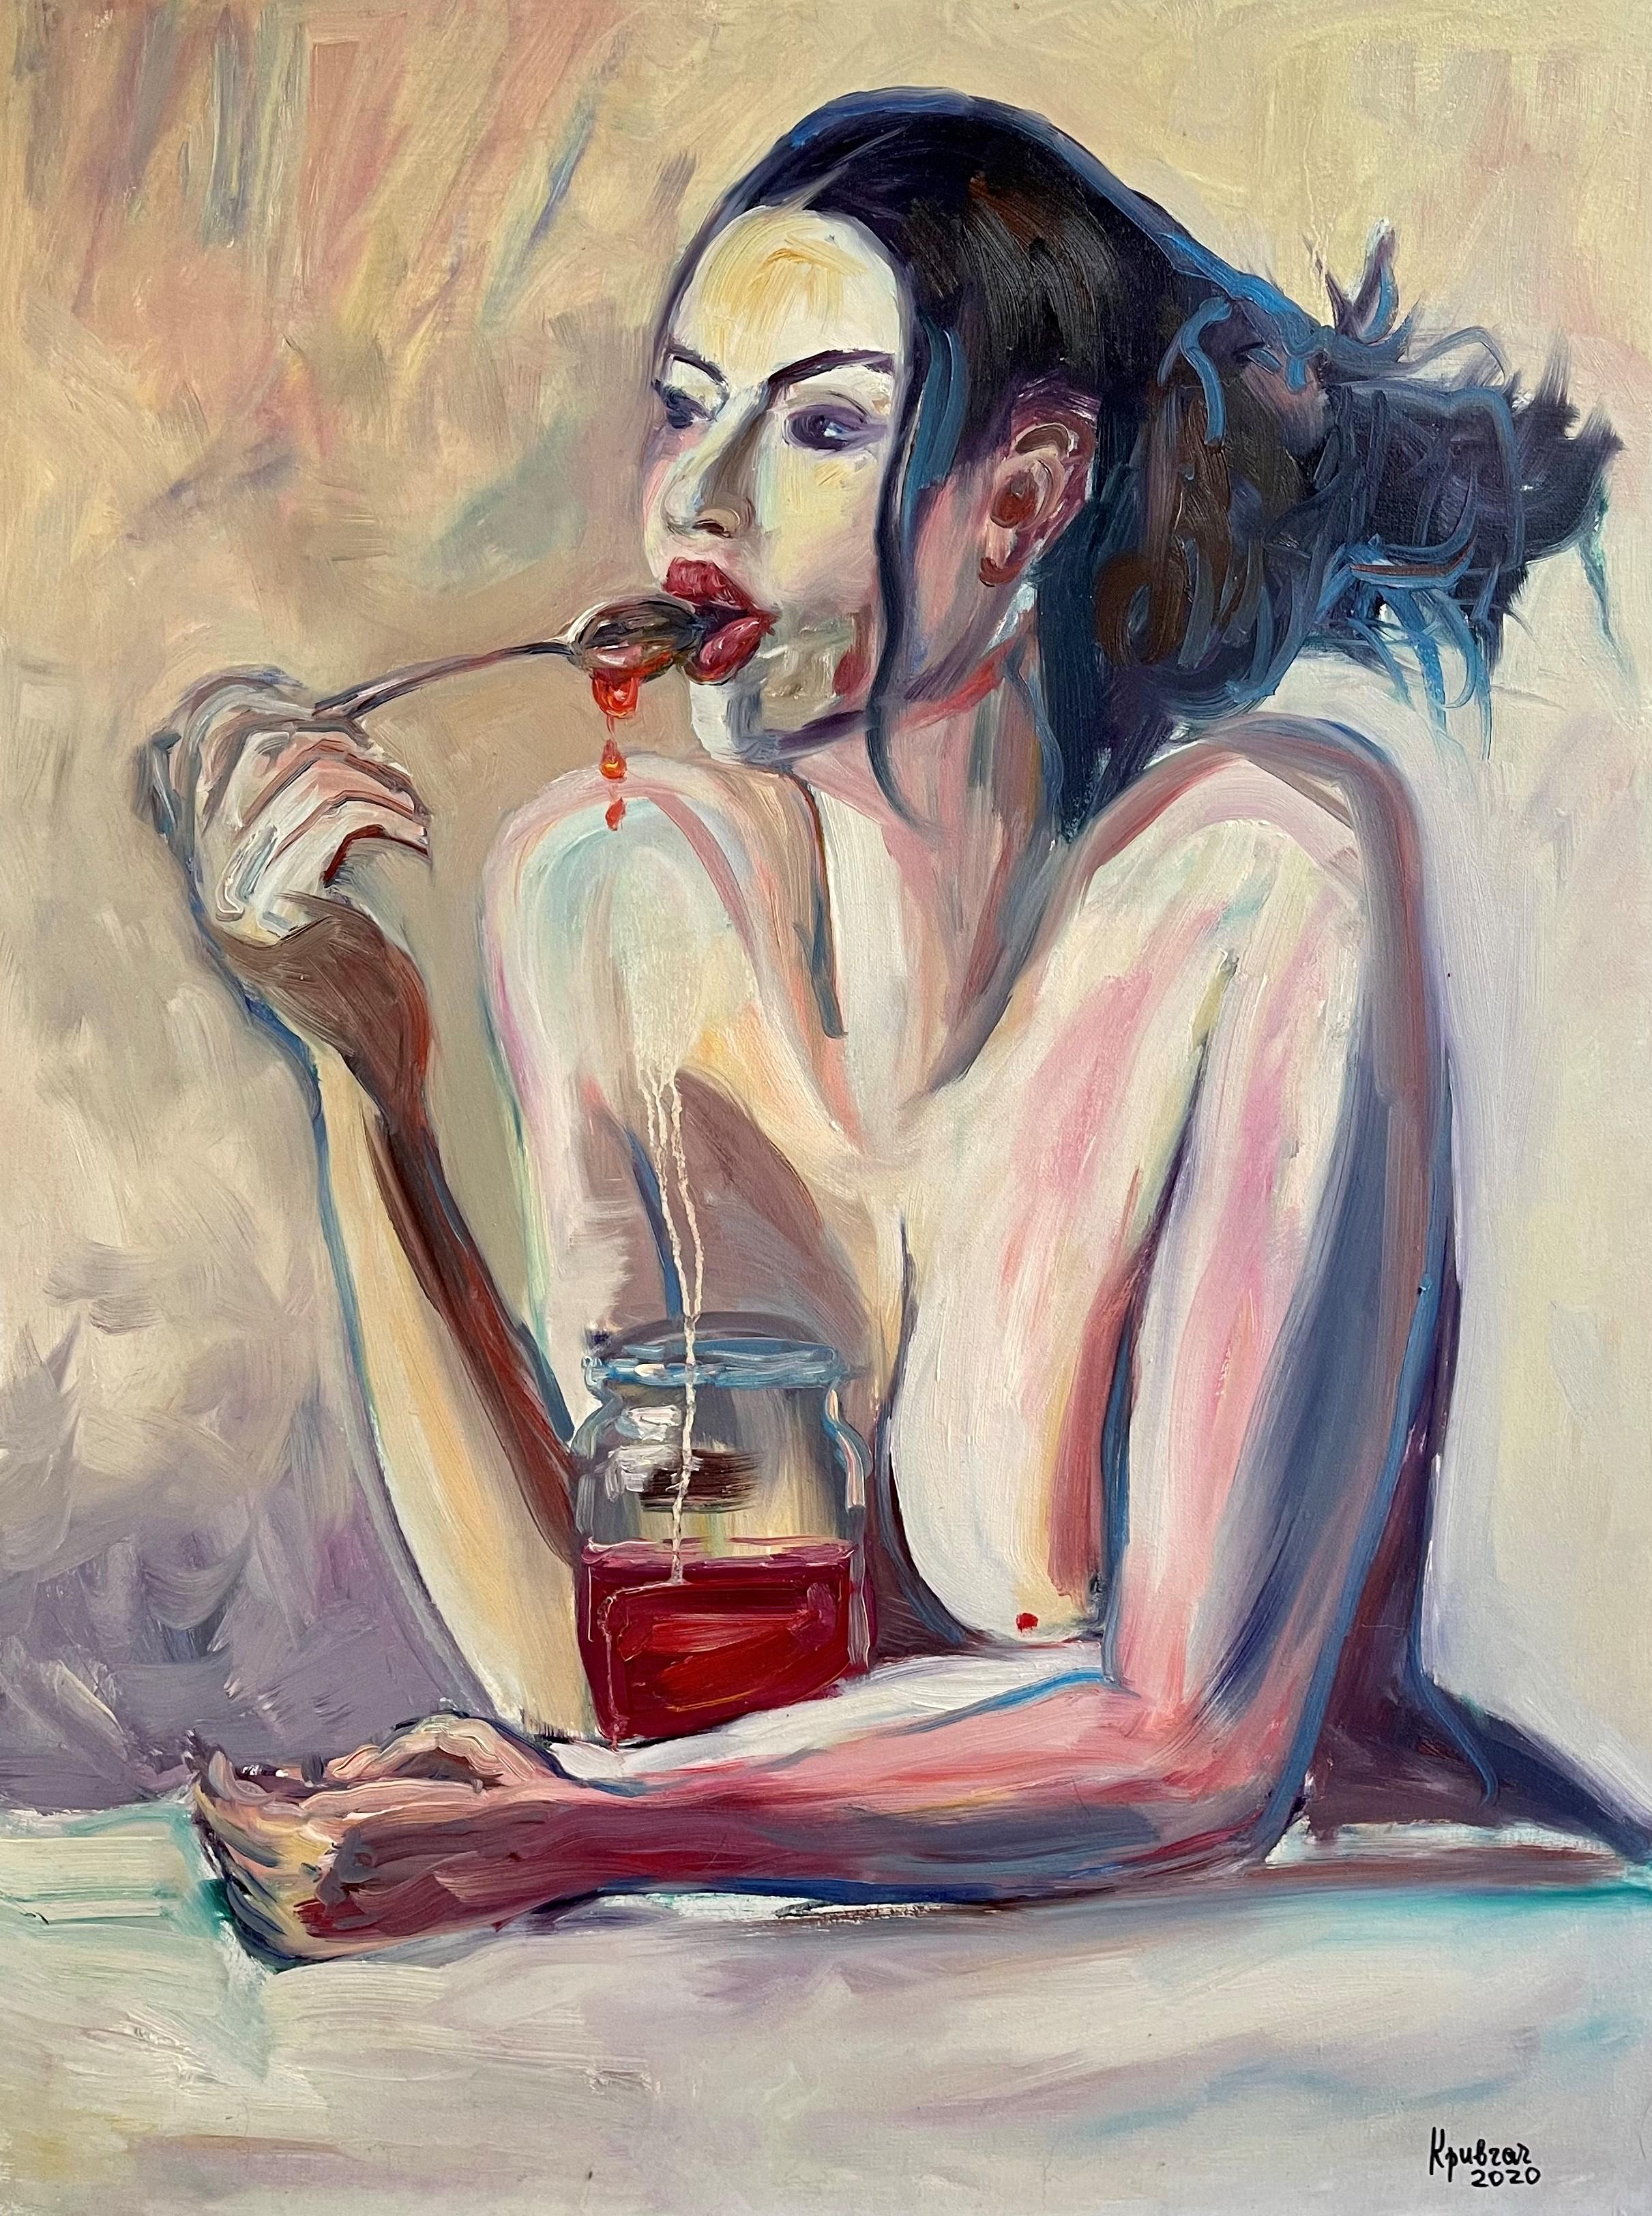  Kateryna Krivchach Nude Painting - Girl with jam